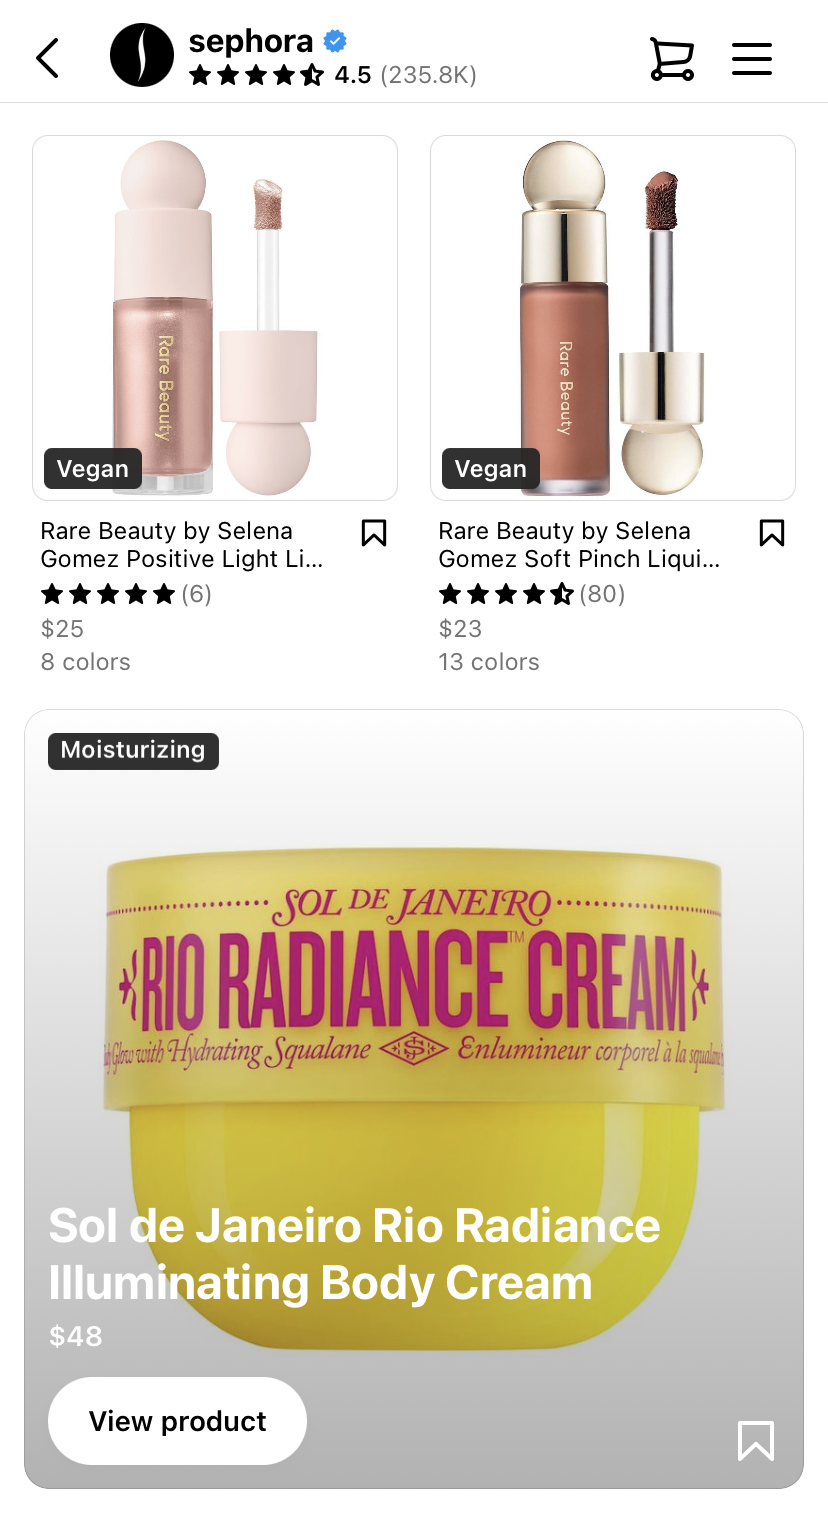 Sephora’s shoppable page example 